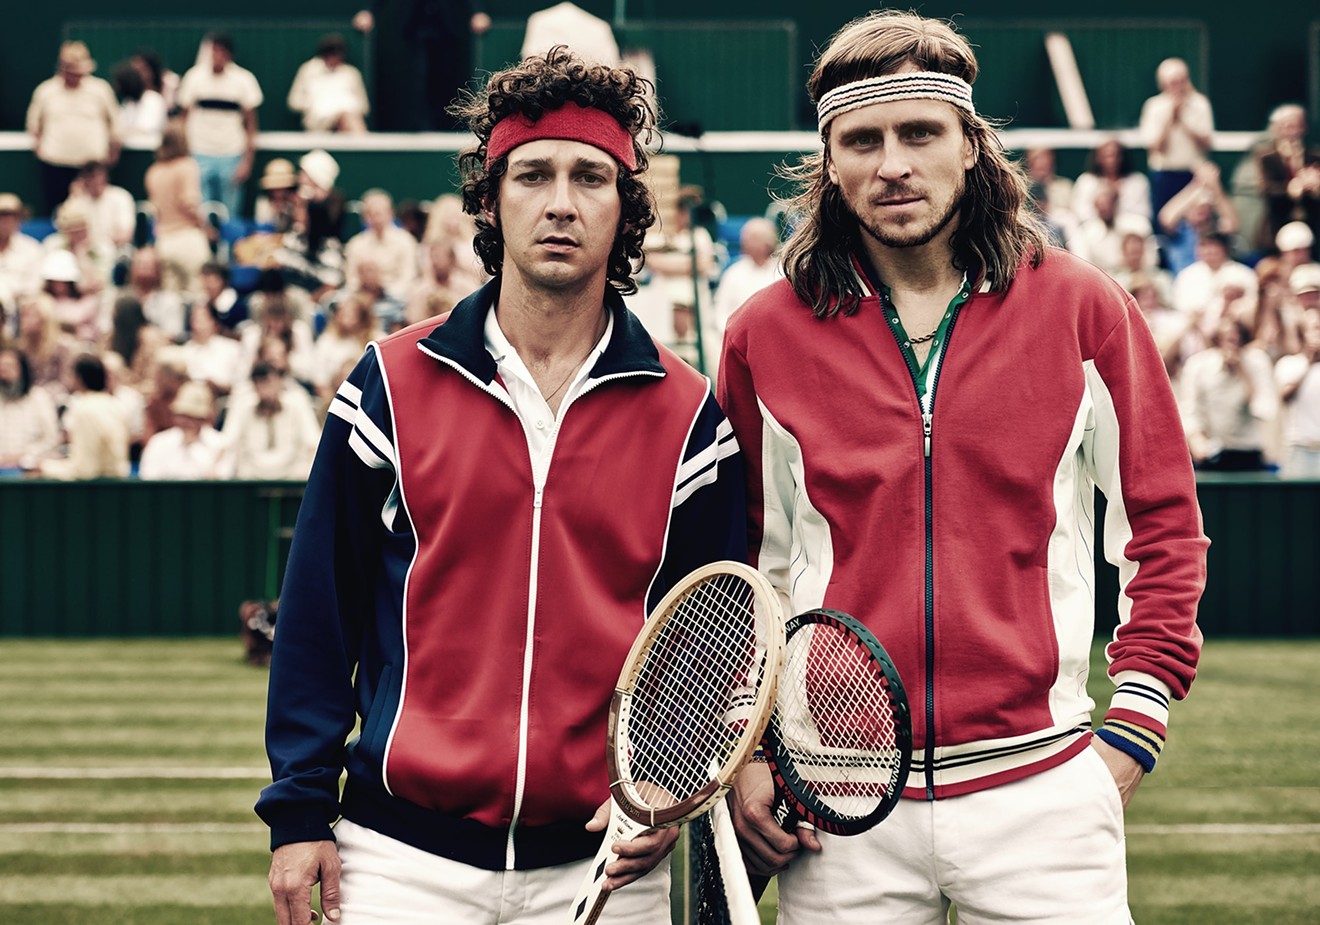 Shia LaBeouf (left) plays John McEnroe, the hotheaded,  filthy-mouthed tennis star, and Sverrir Gudnason is Björn Borg, the Swede looking to win his record-breaking fifth Wimbledon championship, in Janus Metz’s Borg vs. McEnroe.